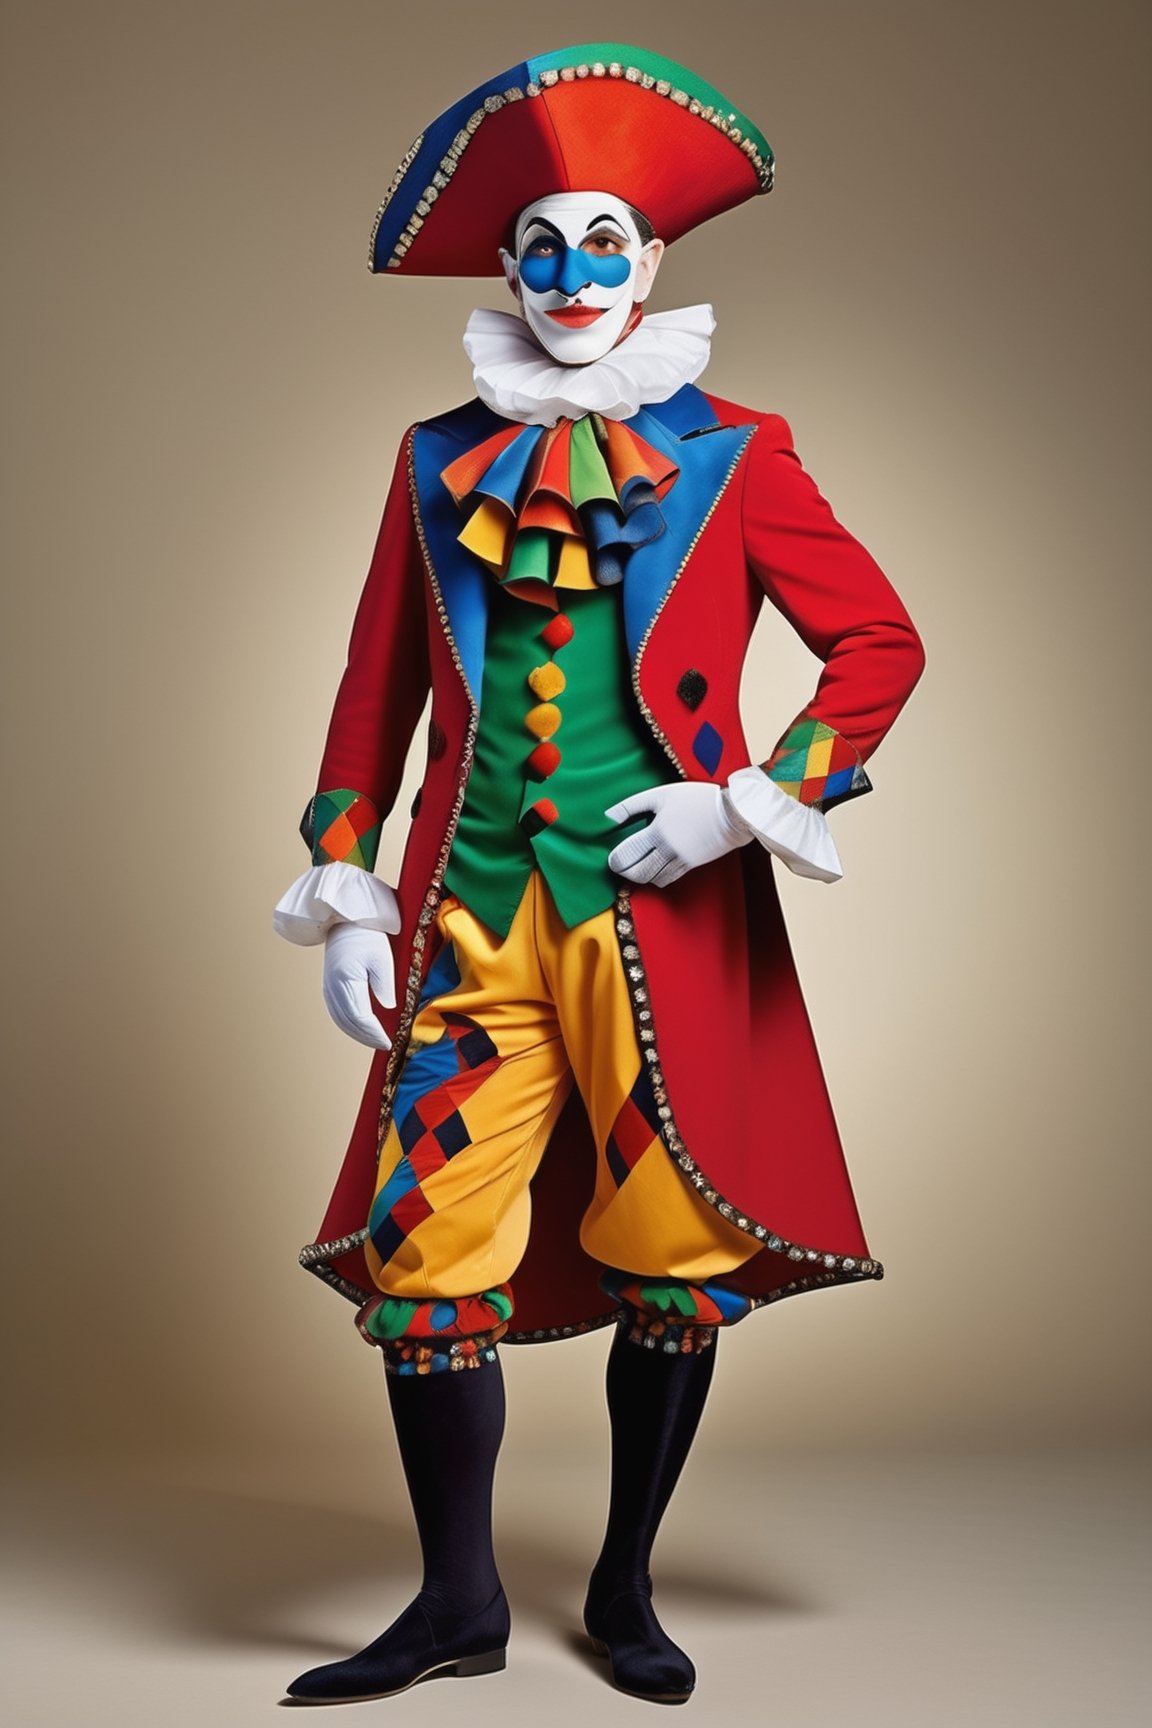 high_resolution, high detail, shiny, hyper realistic, photo quality 8k, In the image, an ((("Arlecchino"))), an iconic character from Italian commedia dell'arte, is prominently featured, dressed in a vibrant and distinctive costume. His attire, snug-fitting and full of personality, showcases a pattern of multicolored diamonds, spanning a range of bright and eye-catching hues. Each diamond is a mosaic of colors, including reds, blues, yellows, greens, and oranges, giving the costume a cheerful and festive look.

The Arlecchino's attire includes a tight-fitting jacket with long sleeves and pants that follow the same multicolored diamond pattern. His waist is accentuated with a striking belt that perfectly complements the ensemble. The outfit is completed with the typical three-pointed hat, known as a "tricorn," which is also adorned with the same diamonds and colors, adding a touch of elegance and extravagance.

The Arlecchino's face is often painted with bright colors and theatrical expressions. His eyes may be encircled in black and white, accentuating his playful and mischievous gaze. The Arlecchino, in his colorful attire and distinctive hat, personifies joy and a festive spirit, evoking the tradition and merriment of Italian commedia dell'arte.